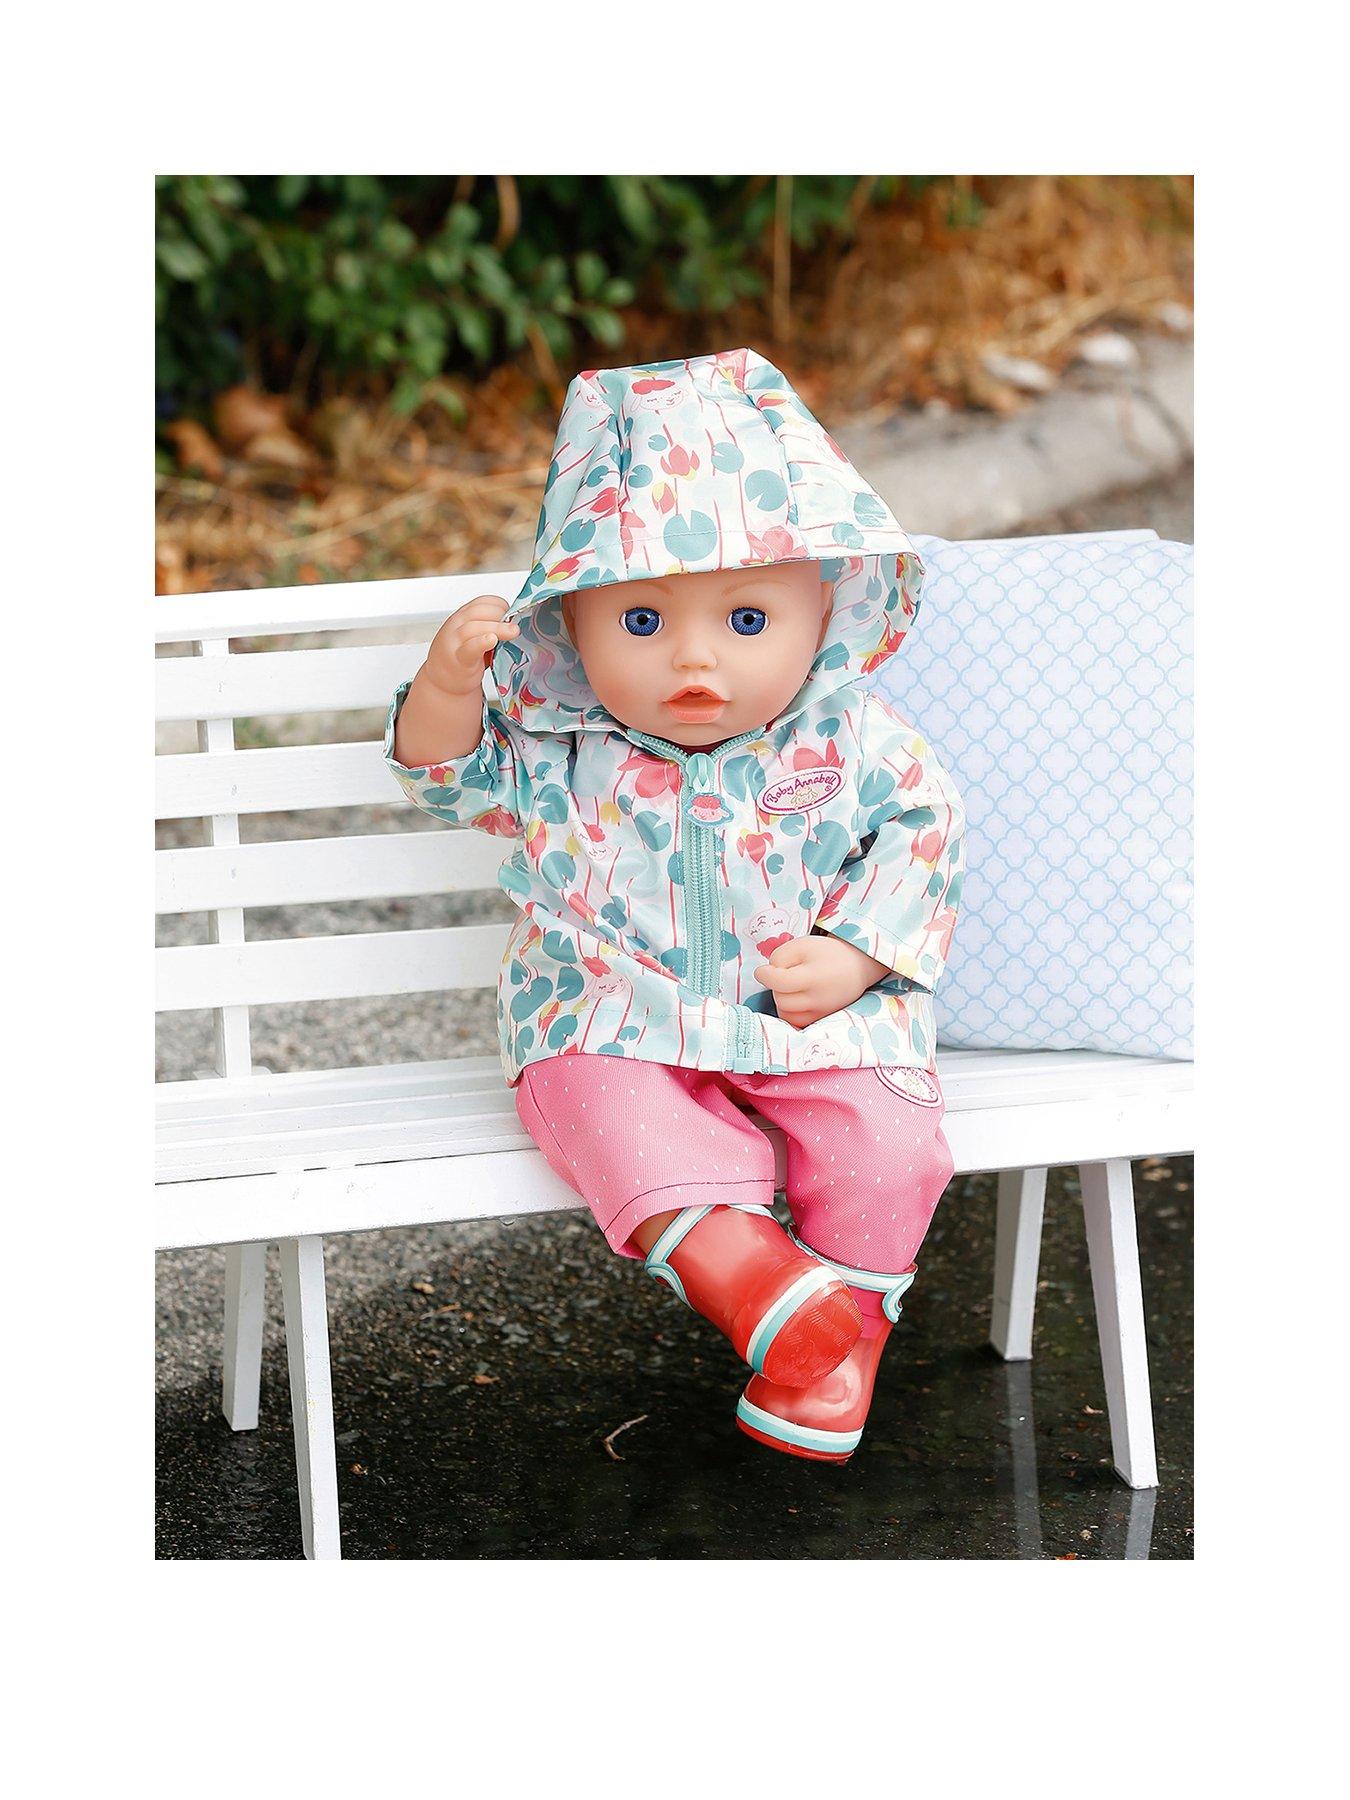 baby annabell clothes 43cm